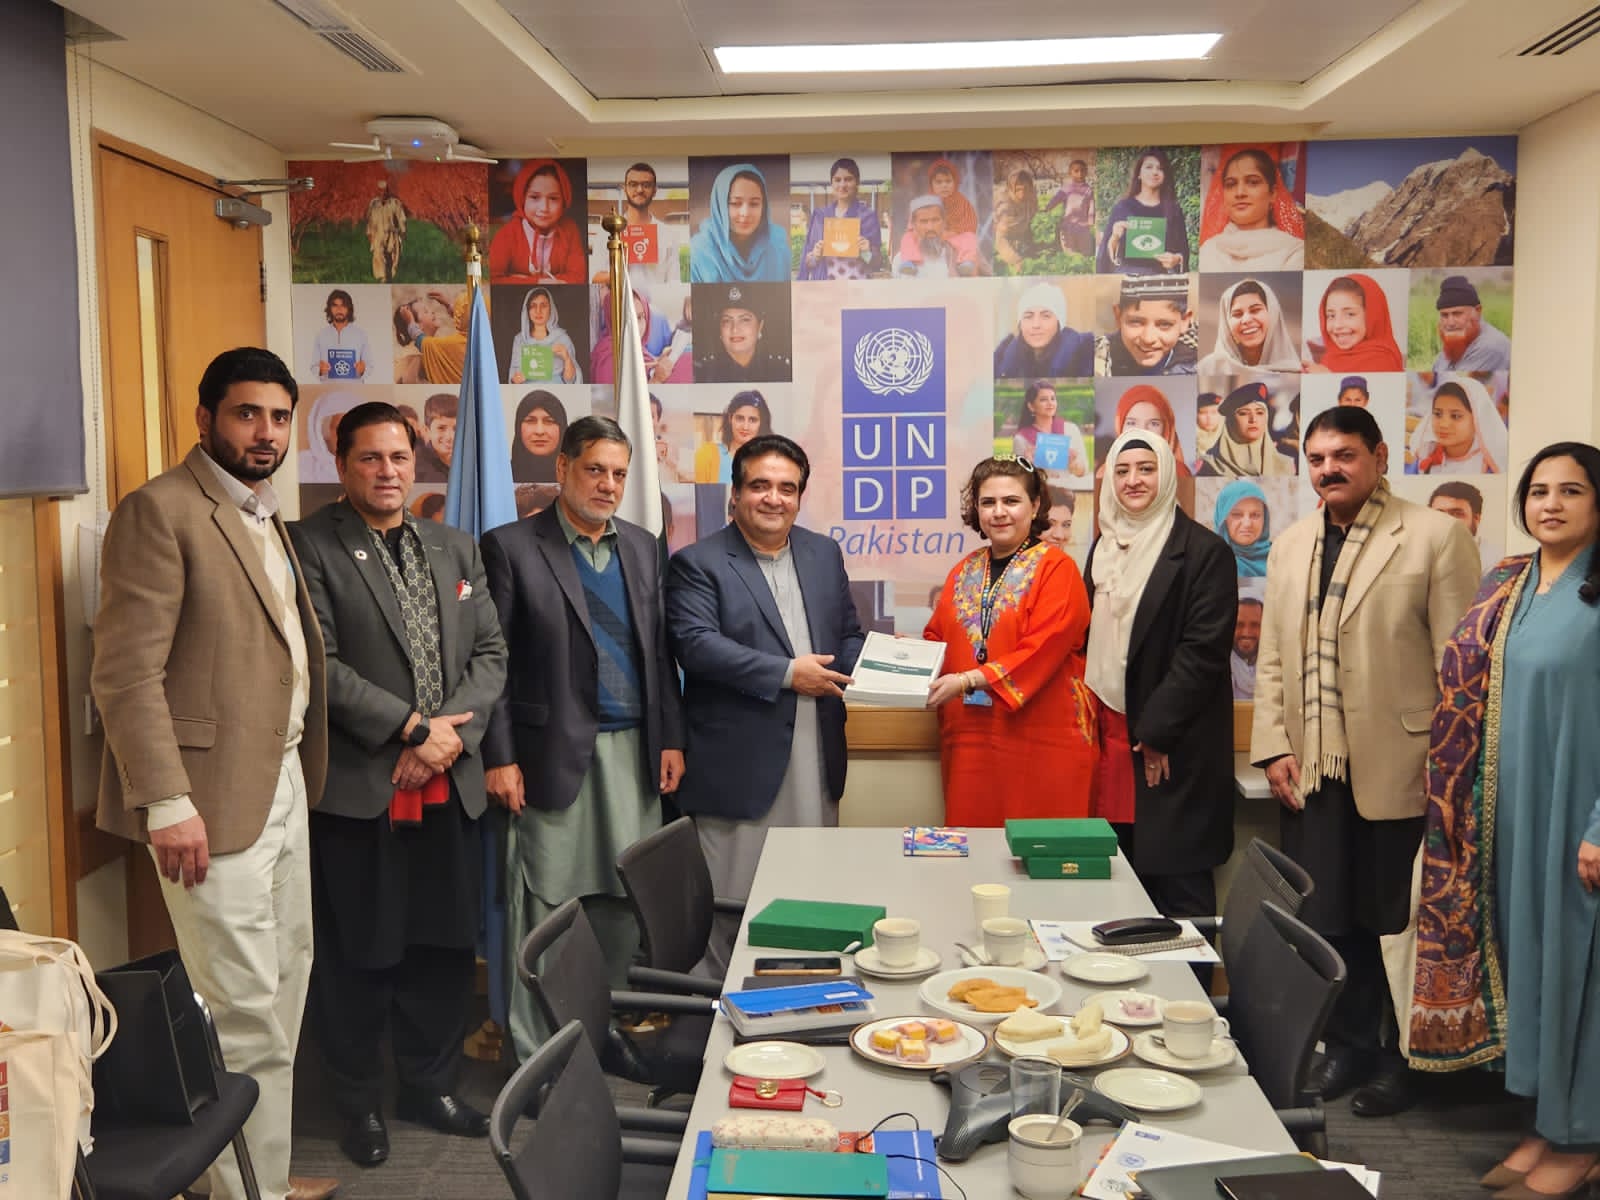 UNDP Pakistan hosted GoAJ&K to discuss areas of mutual interest particularly implementation of SDGs in AJ&K.